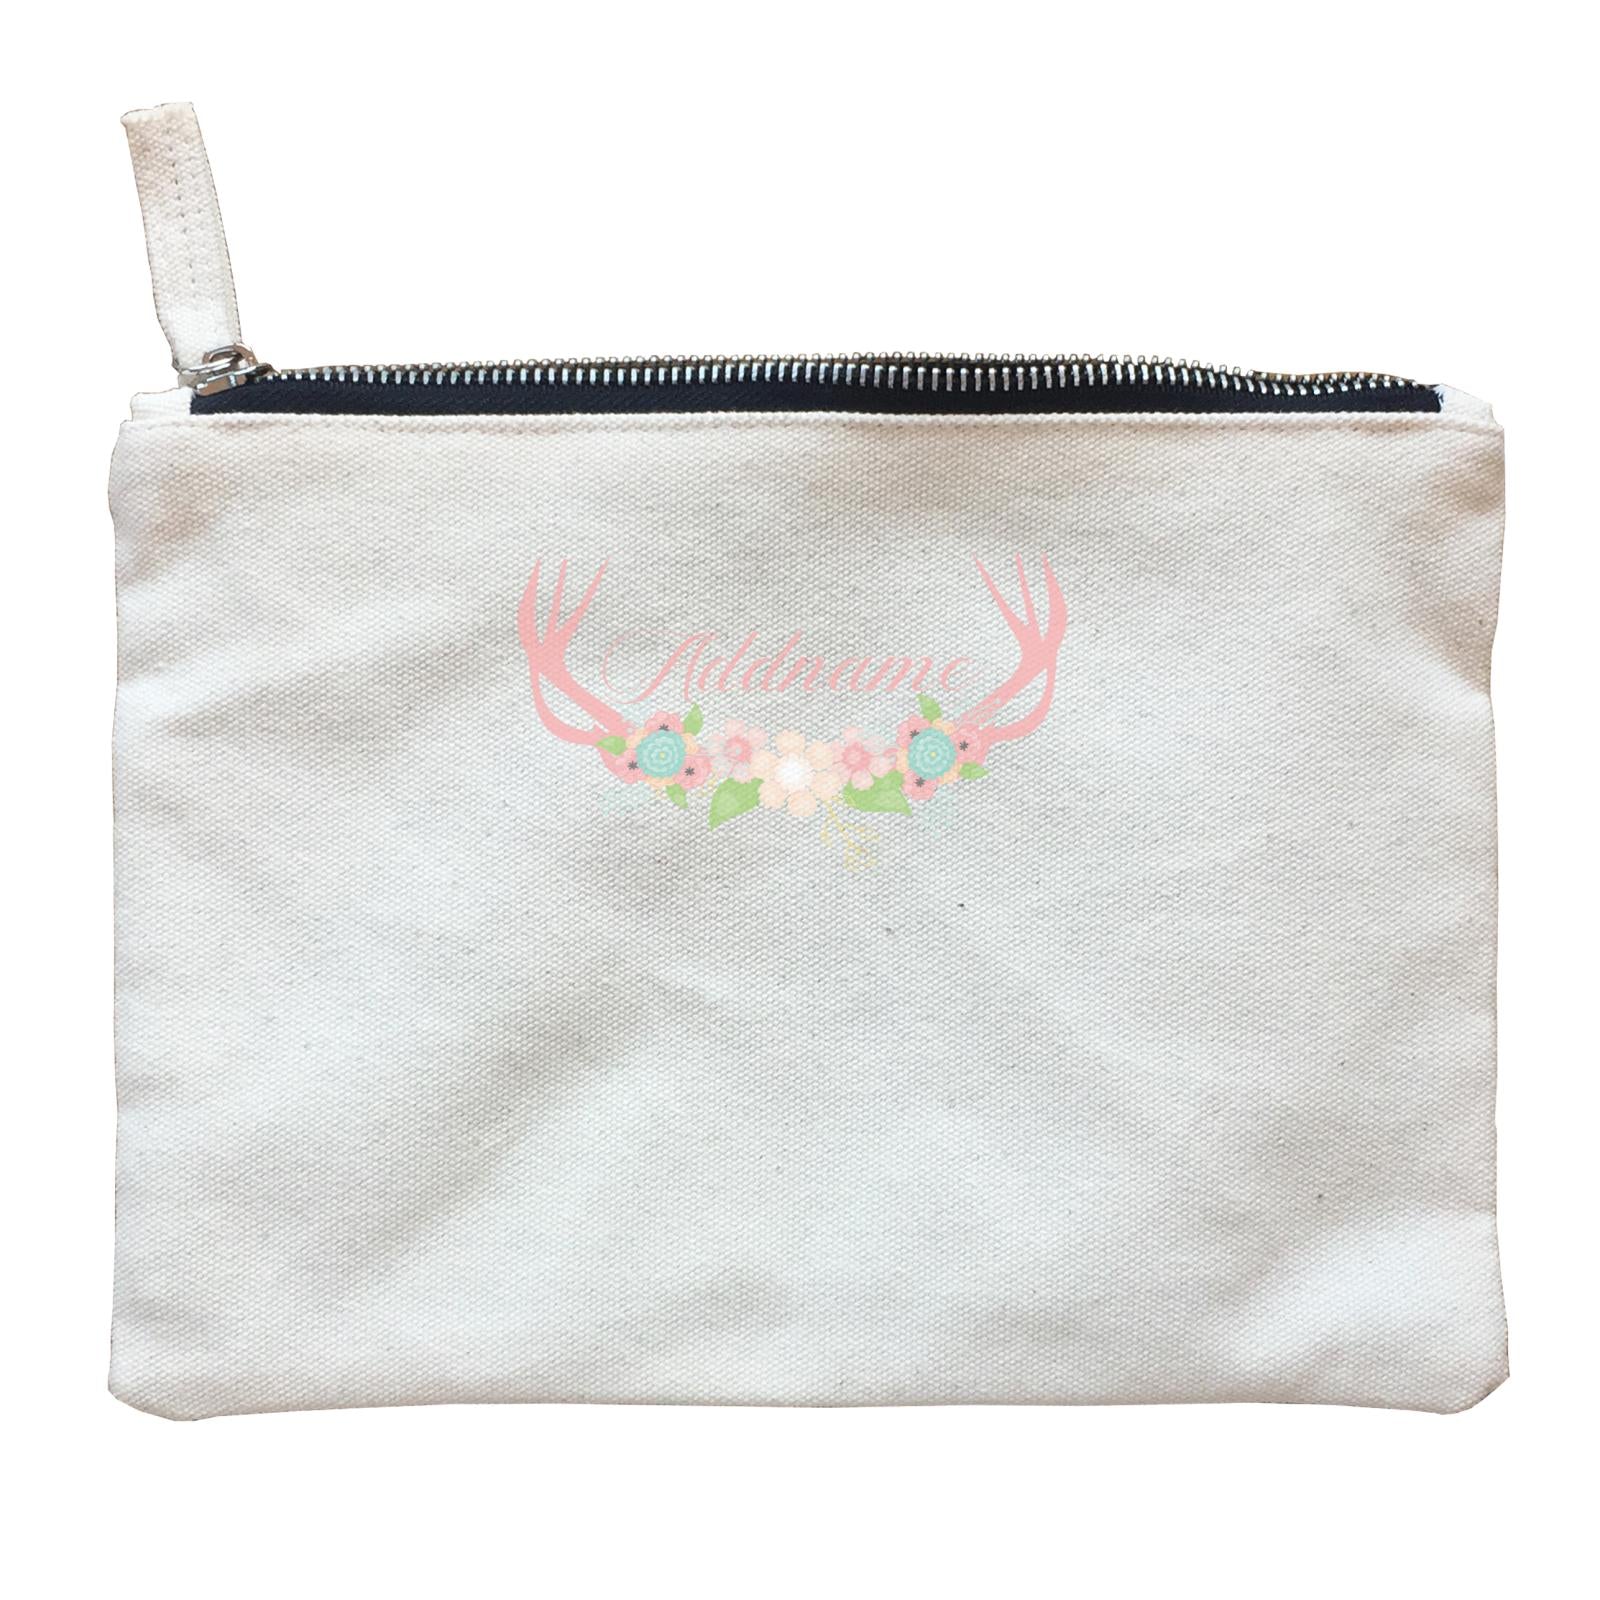 Basic Family Series Pastel Deer Pink Deer Antlers With Flower Addname Zipper Pouch